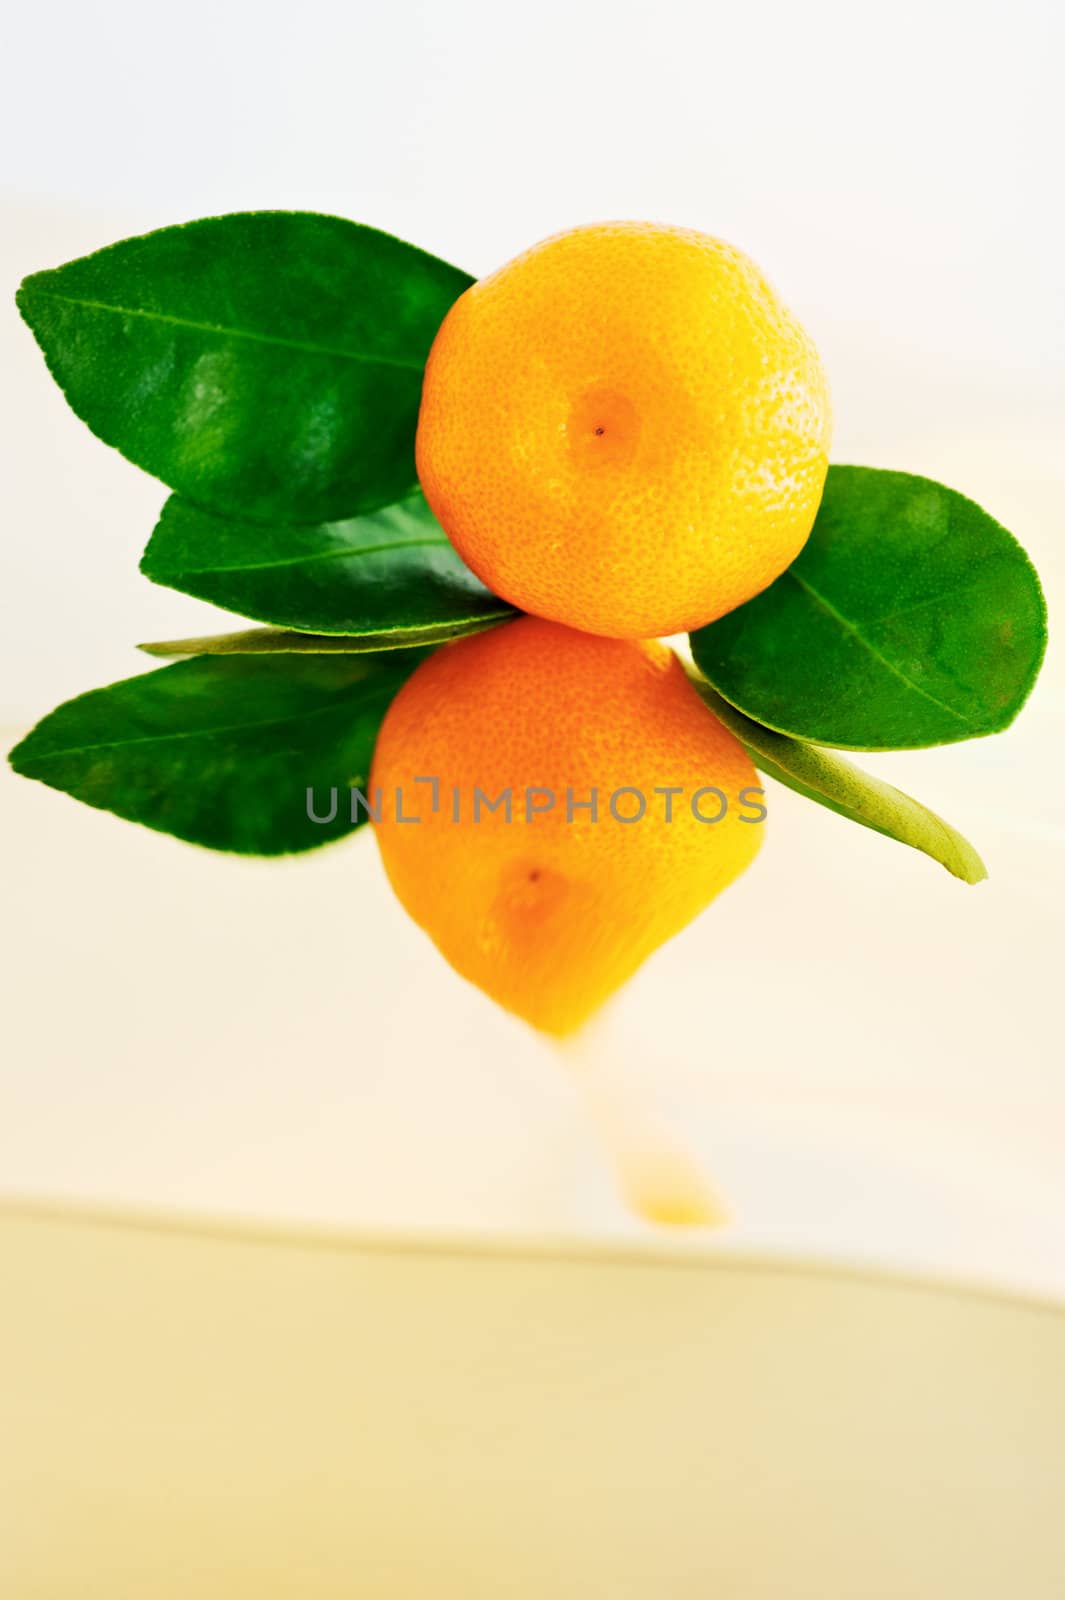 Close-up tangerine with leaves, with its own reflection